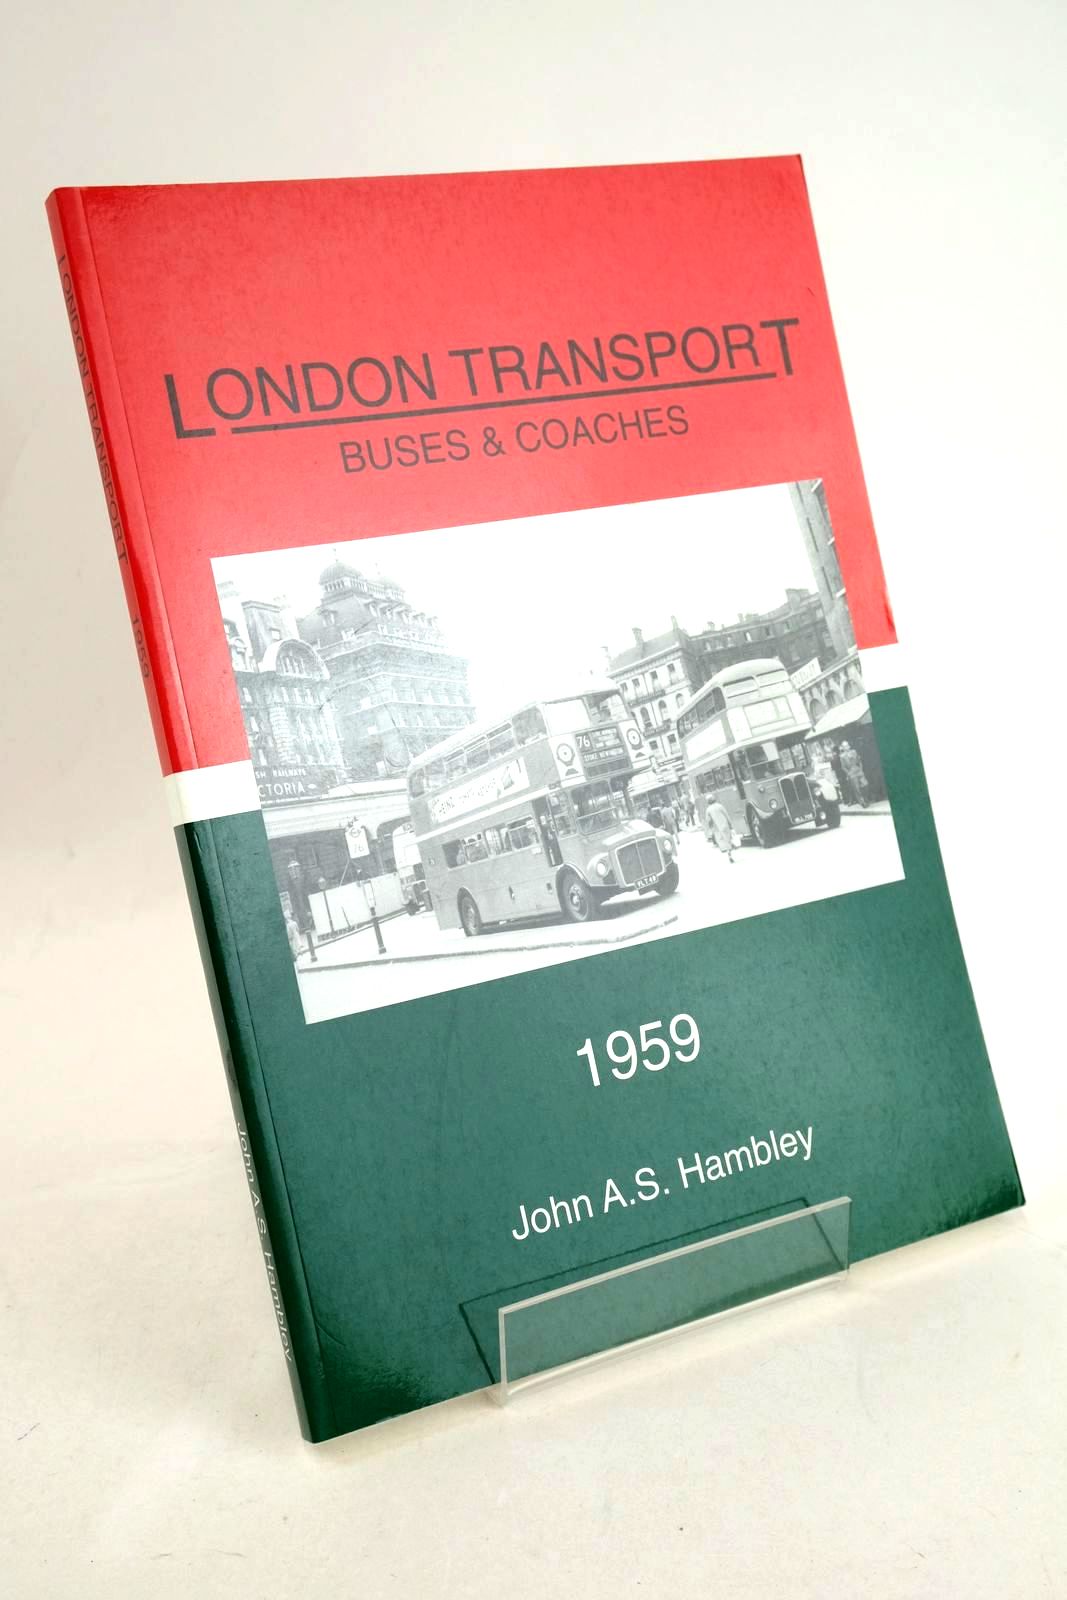 Photo of LONDON TRANSPORT BUSES & COACHES 1959 written by Hambley, John A.S. Ruddom, David published by John A.S. Hambley (STOCK CODE: 1327381)  for sale by Stella & Rose's Books